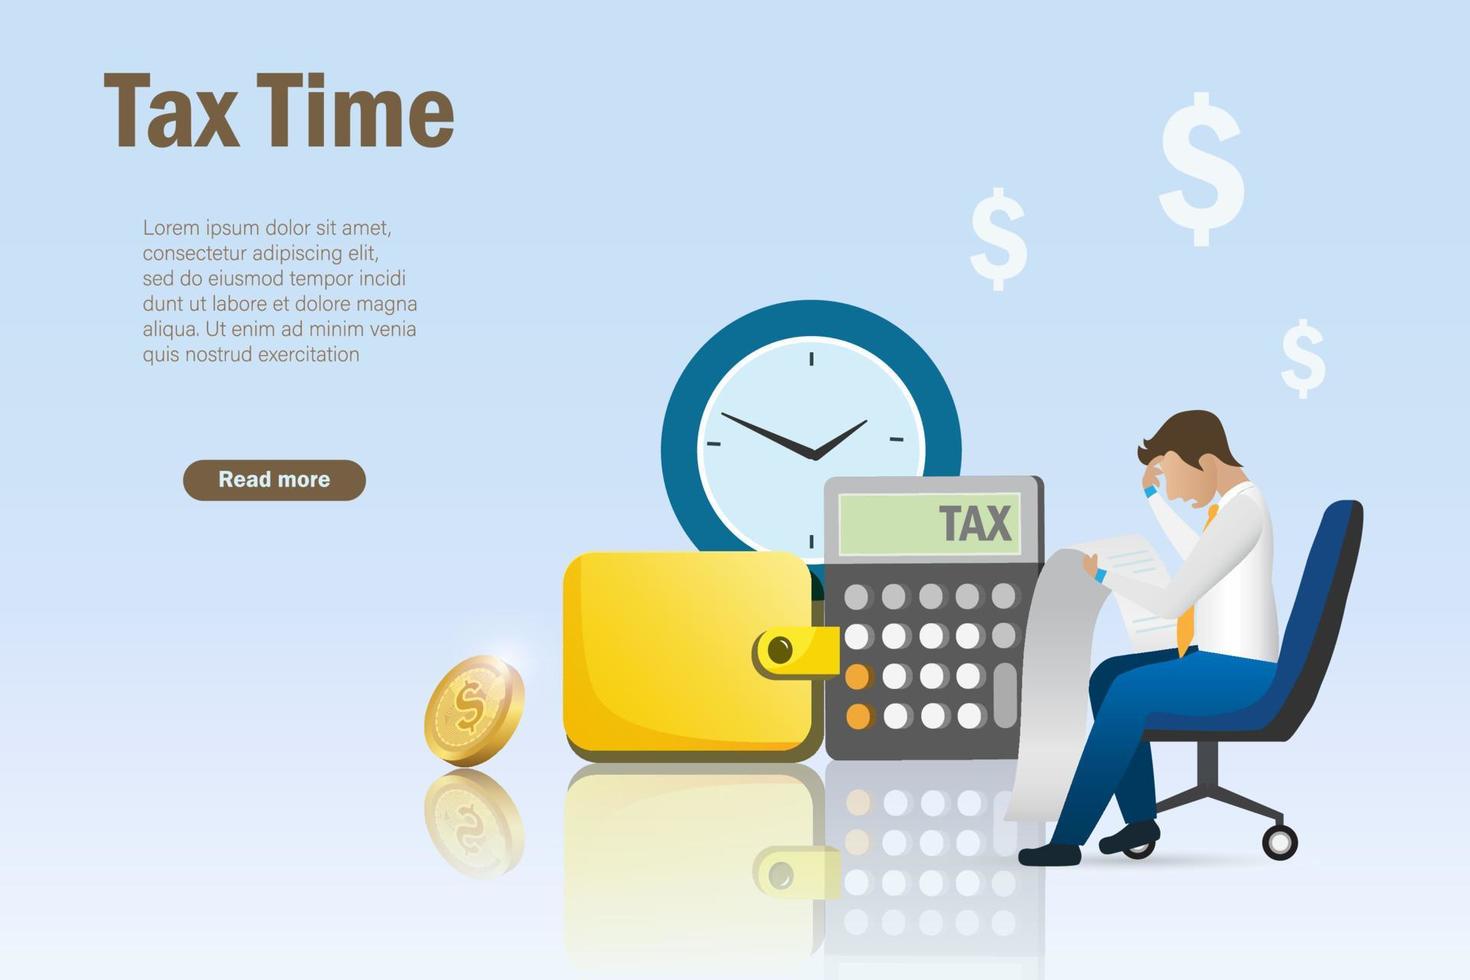 Tax time, income tax payment and expenses. Businessman feeling worried and confused holing bills from calculating fiscal income tax payment. vector